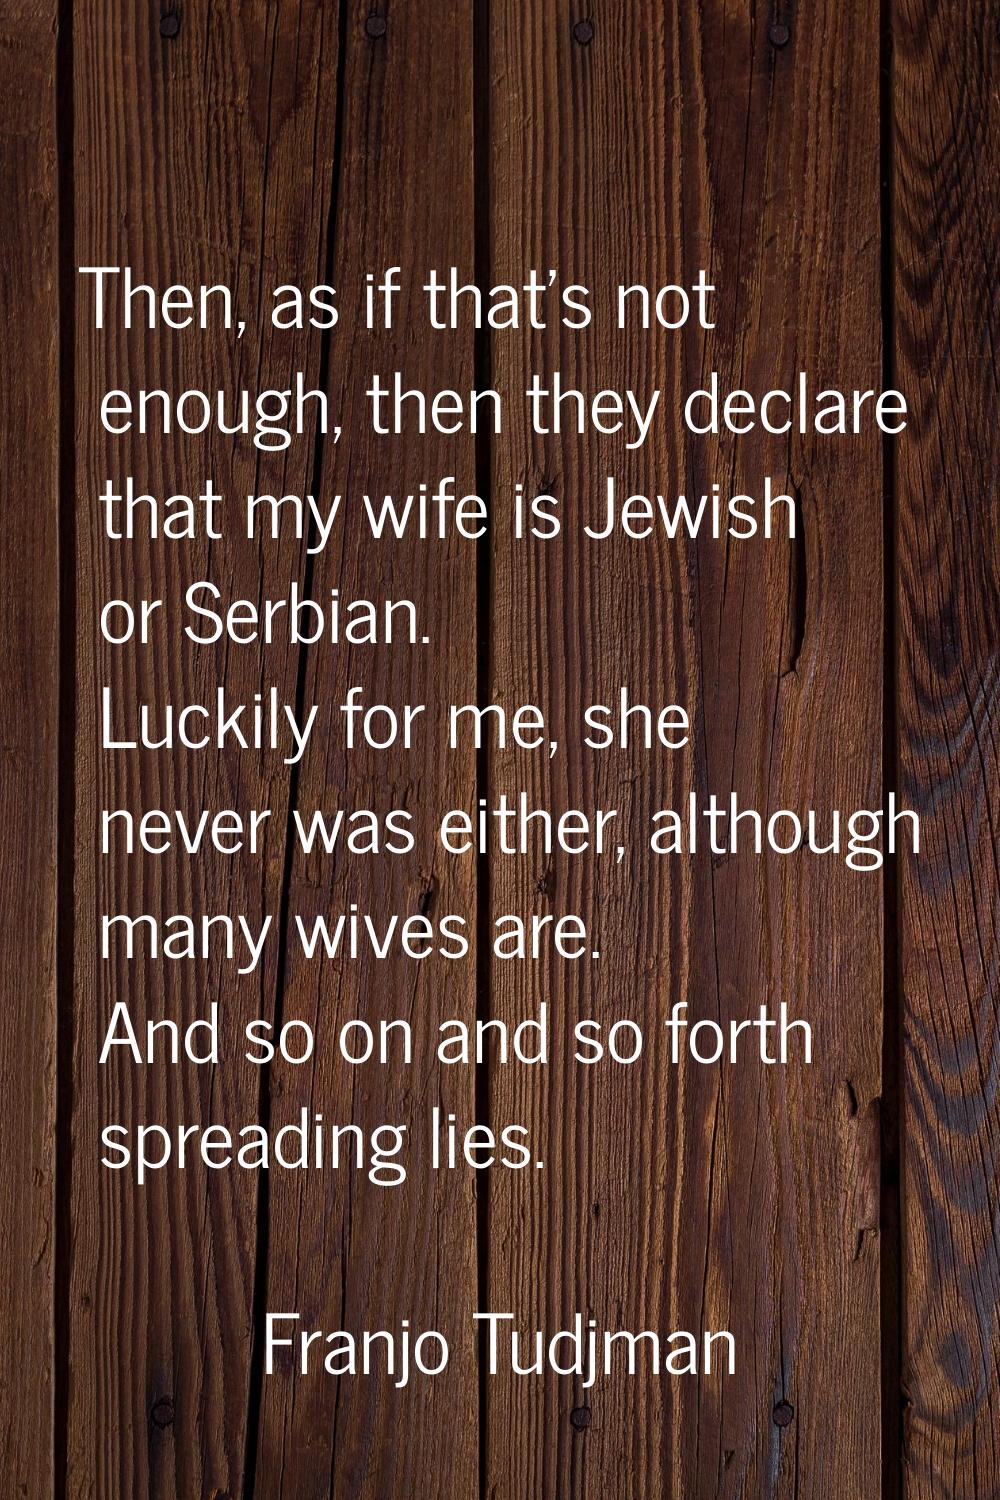 Then, as if that's not enough, then they declare that my wife is Jewish or Serbian. Luckily for me,